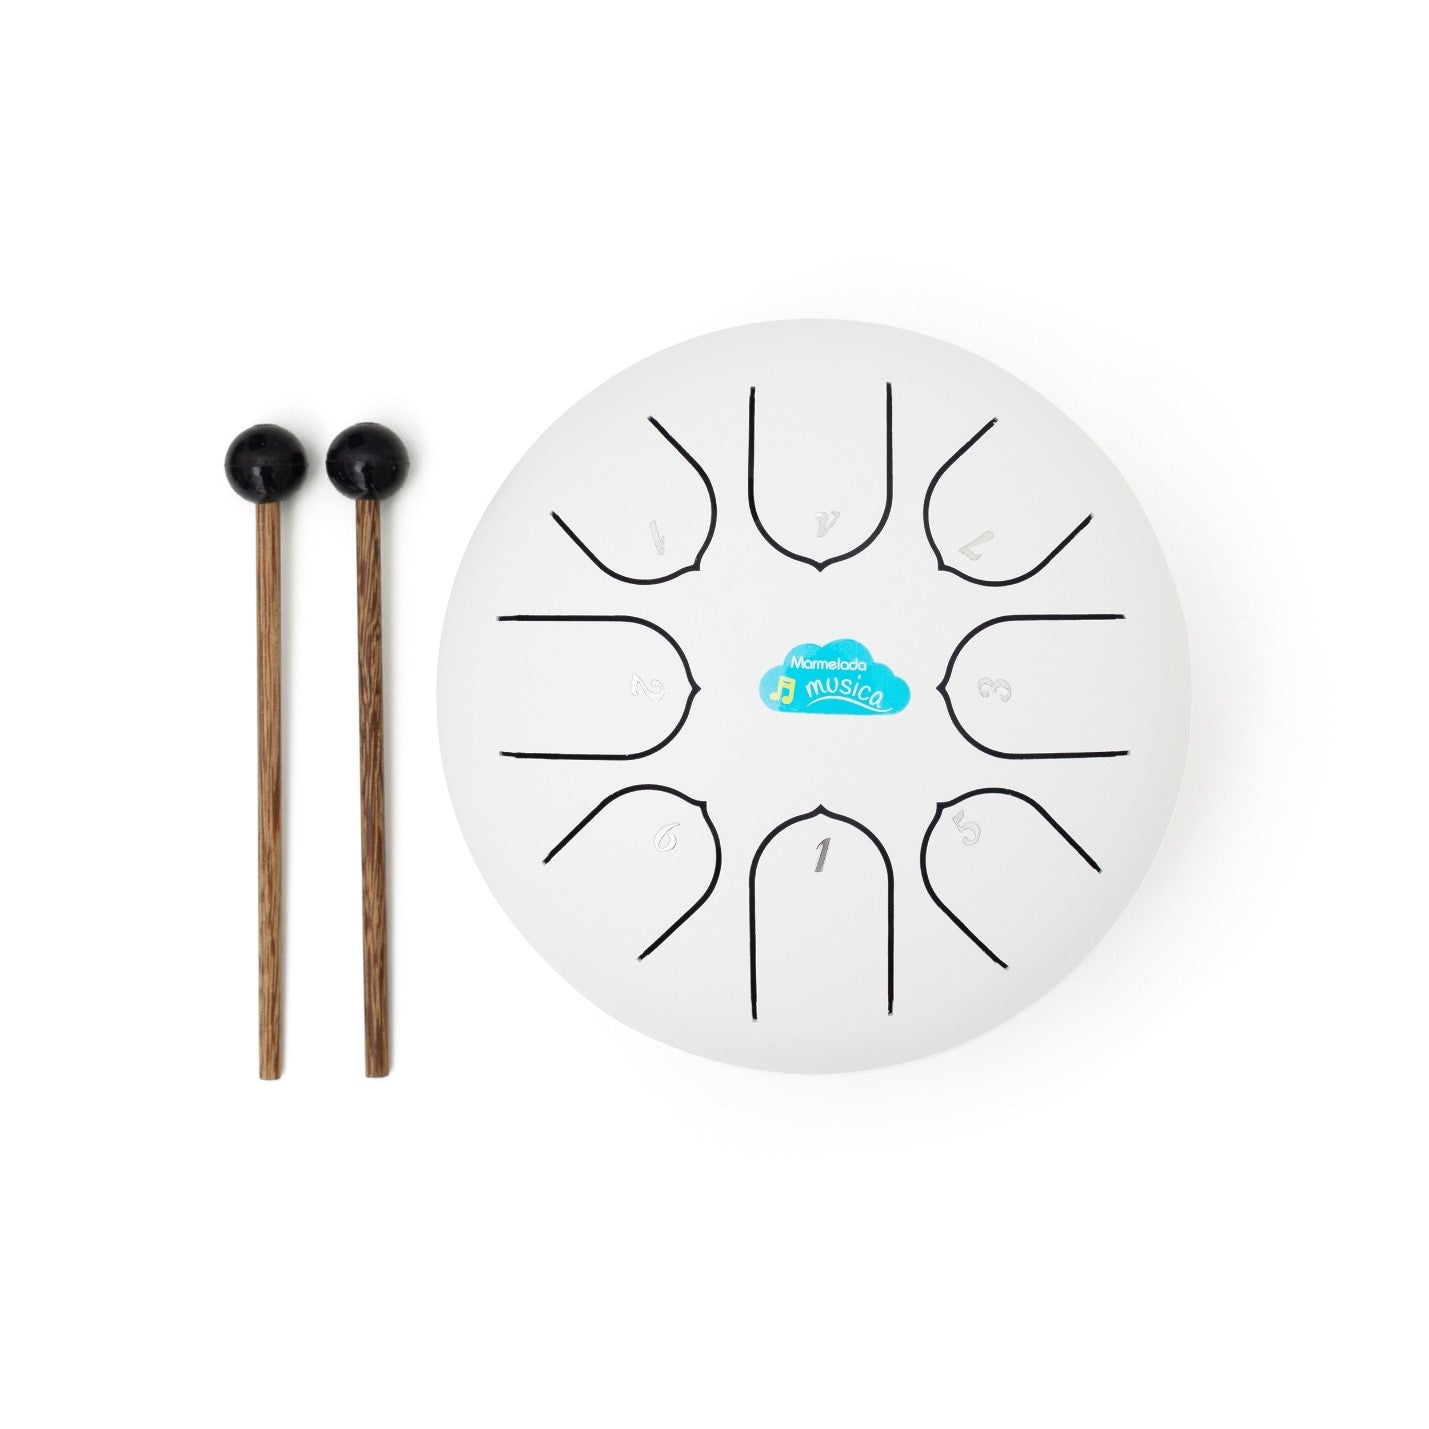 Steel Tongue Drum 6 Inch 8 Notes Hand Drums with Bag Sticks and a Song Book